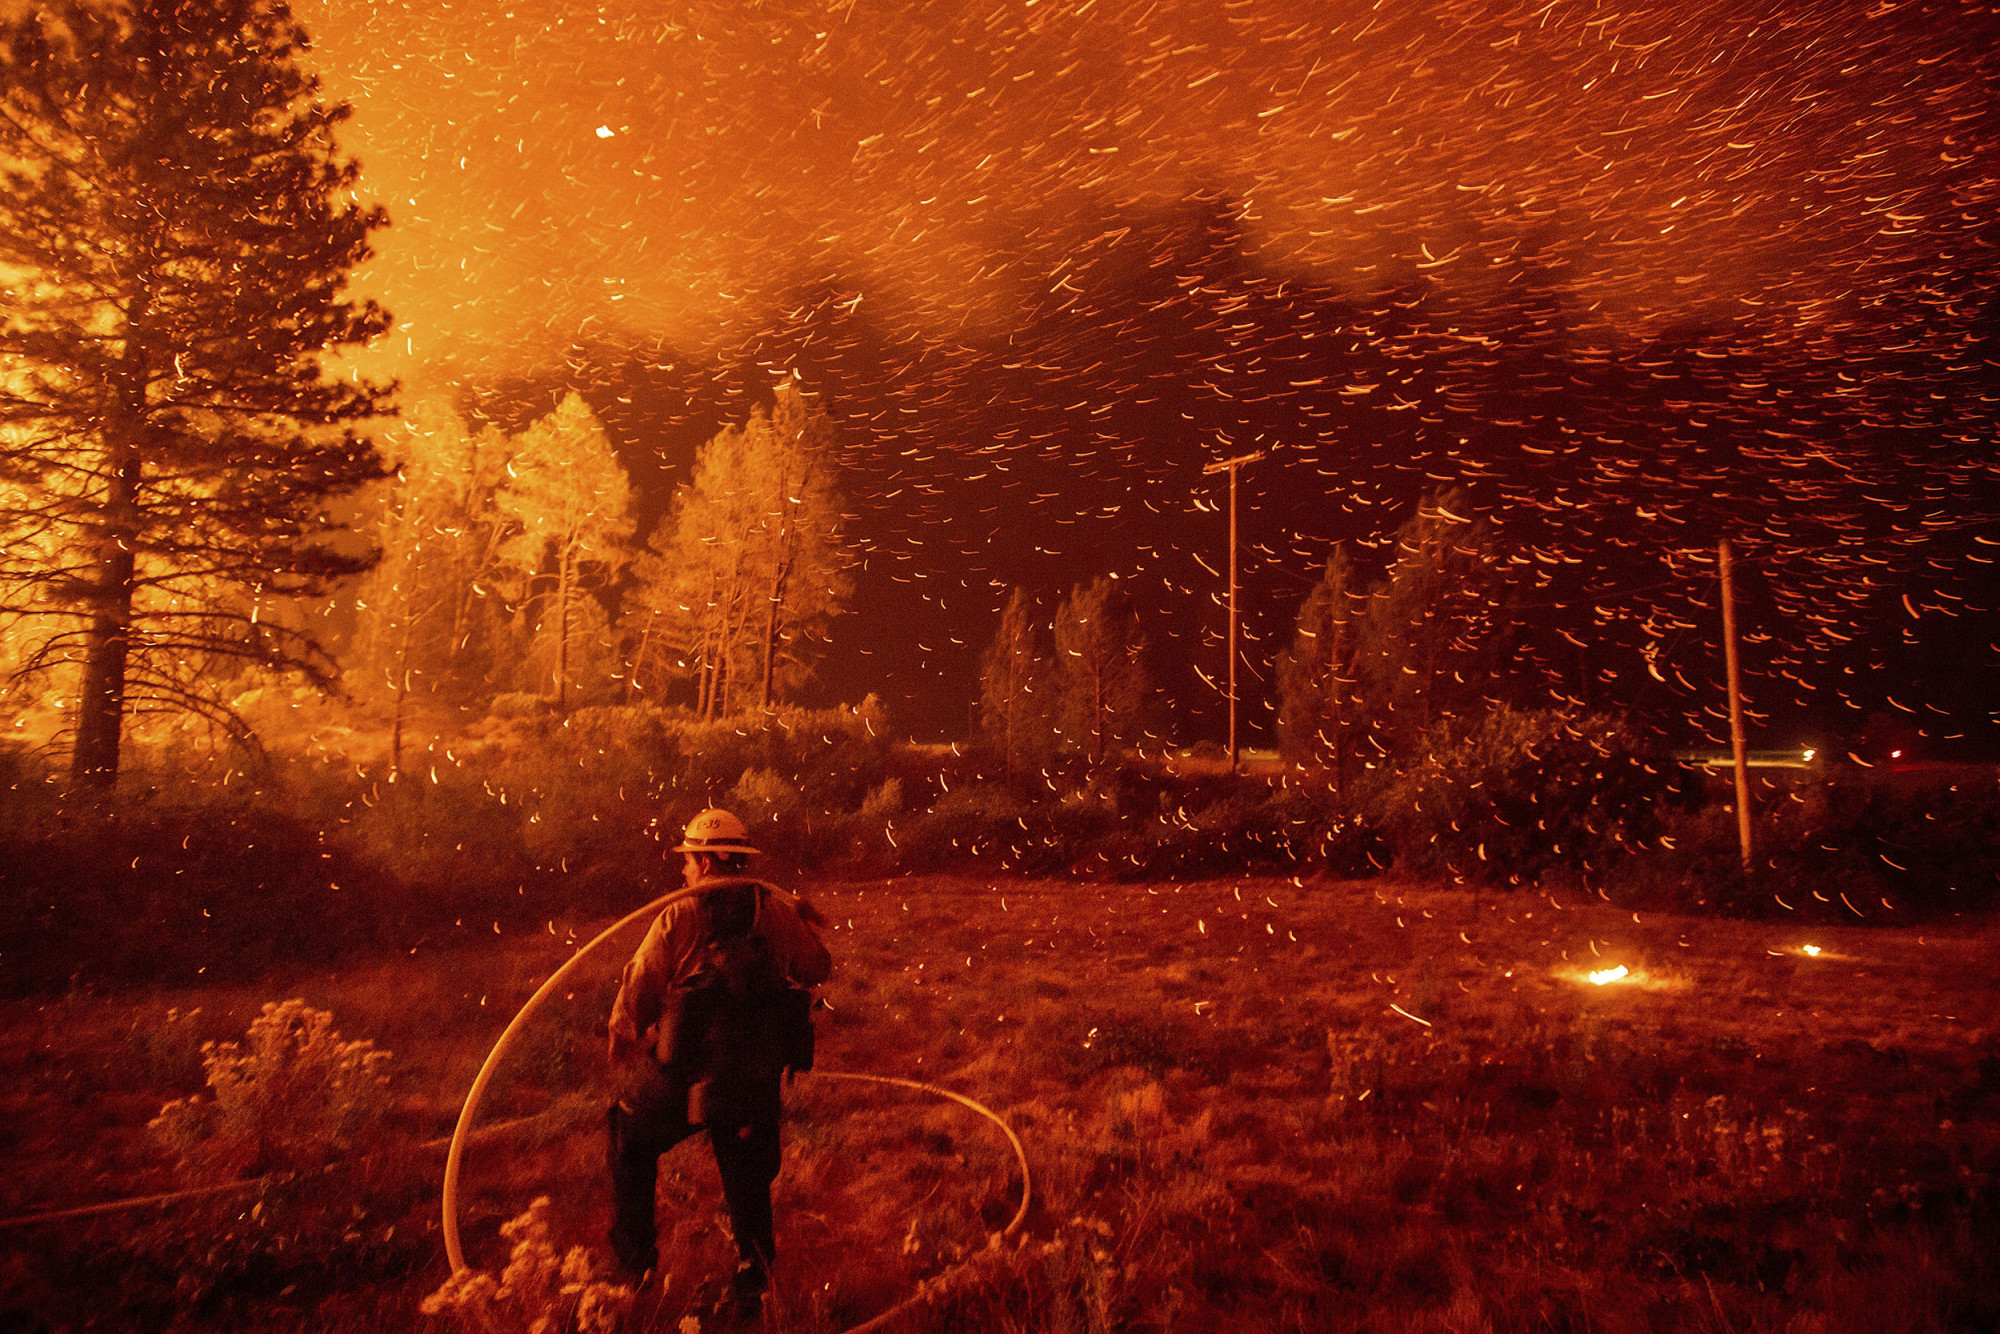 Image: Embers fly above a firefighter as he works to control a backfire as the Delta Fire burns in the Shasta-Trinity National Forest